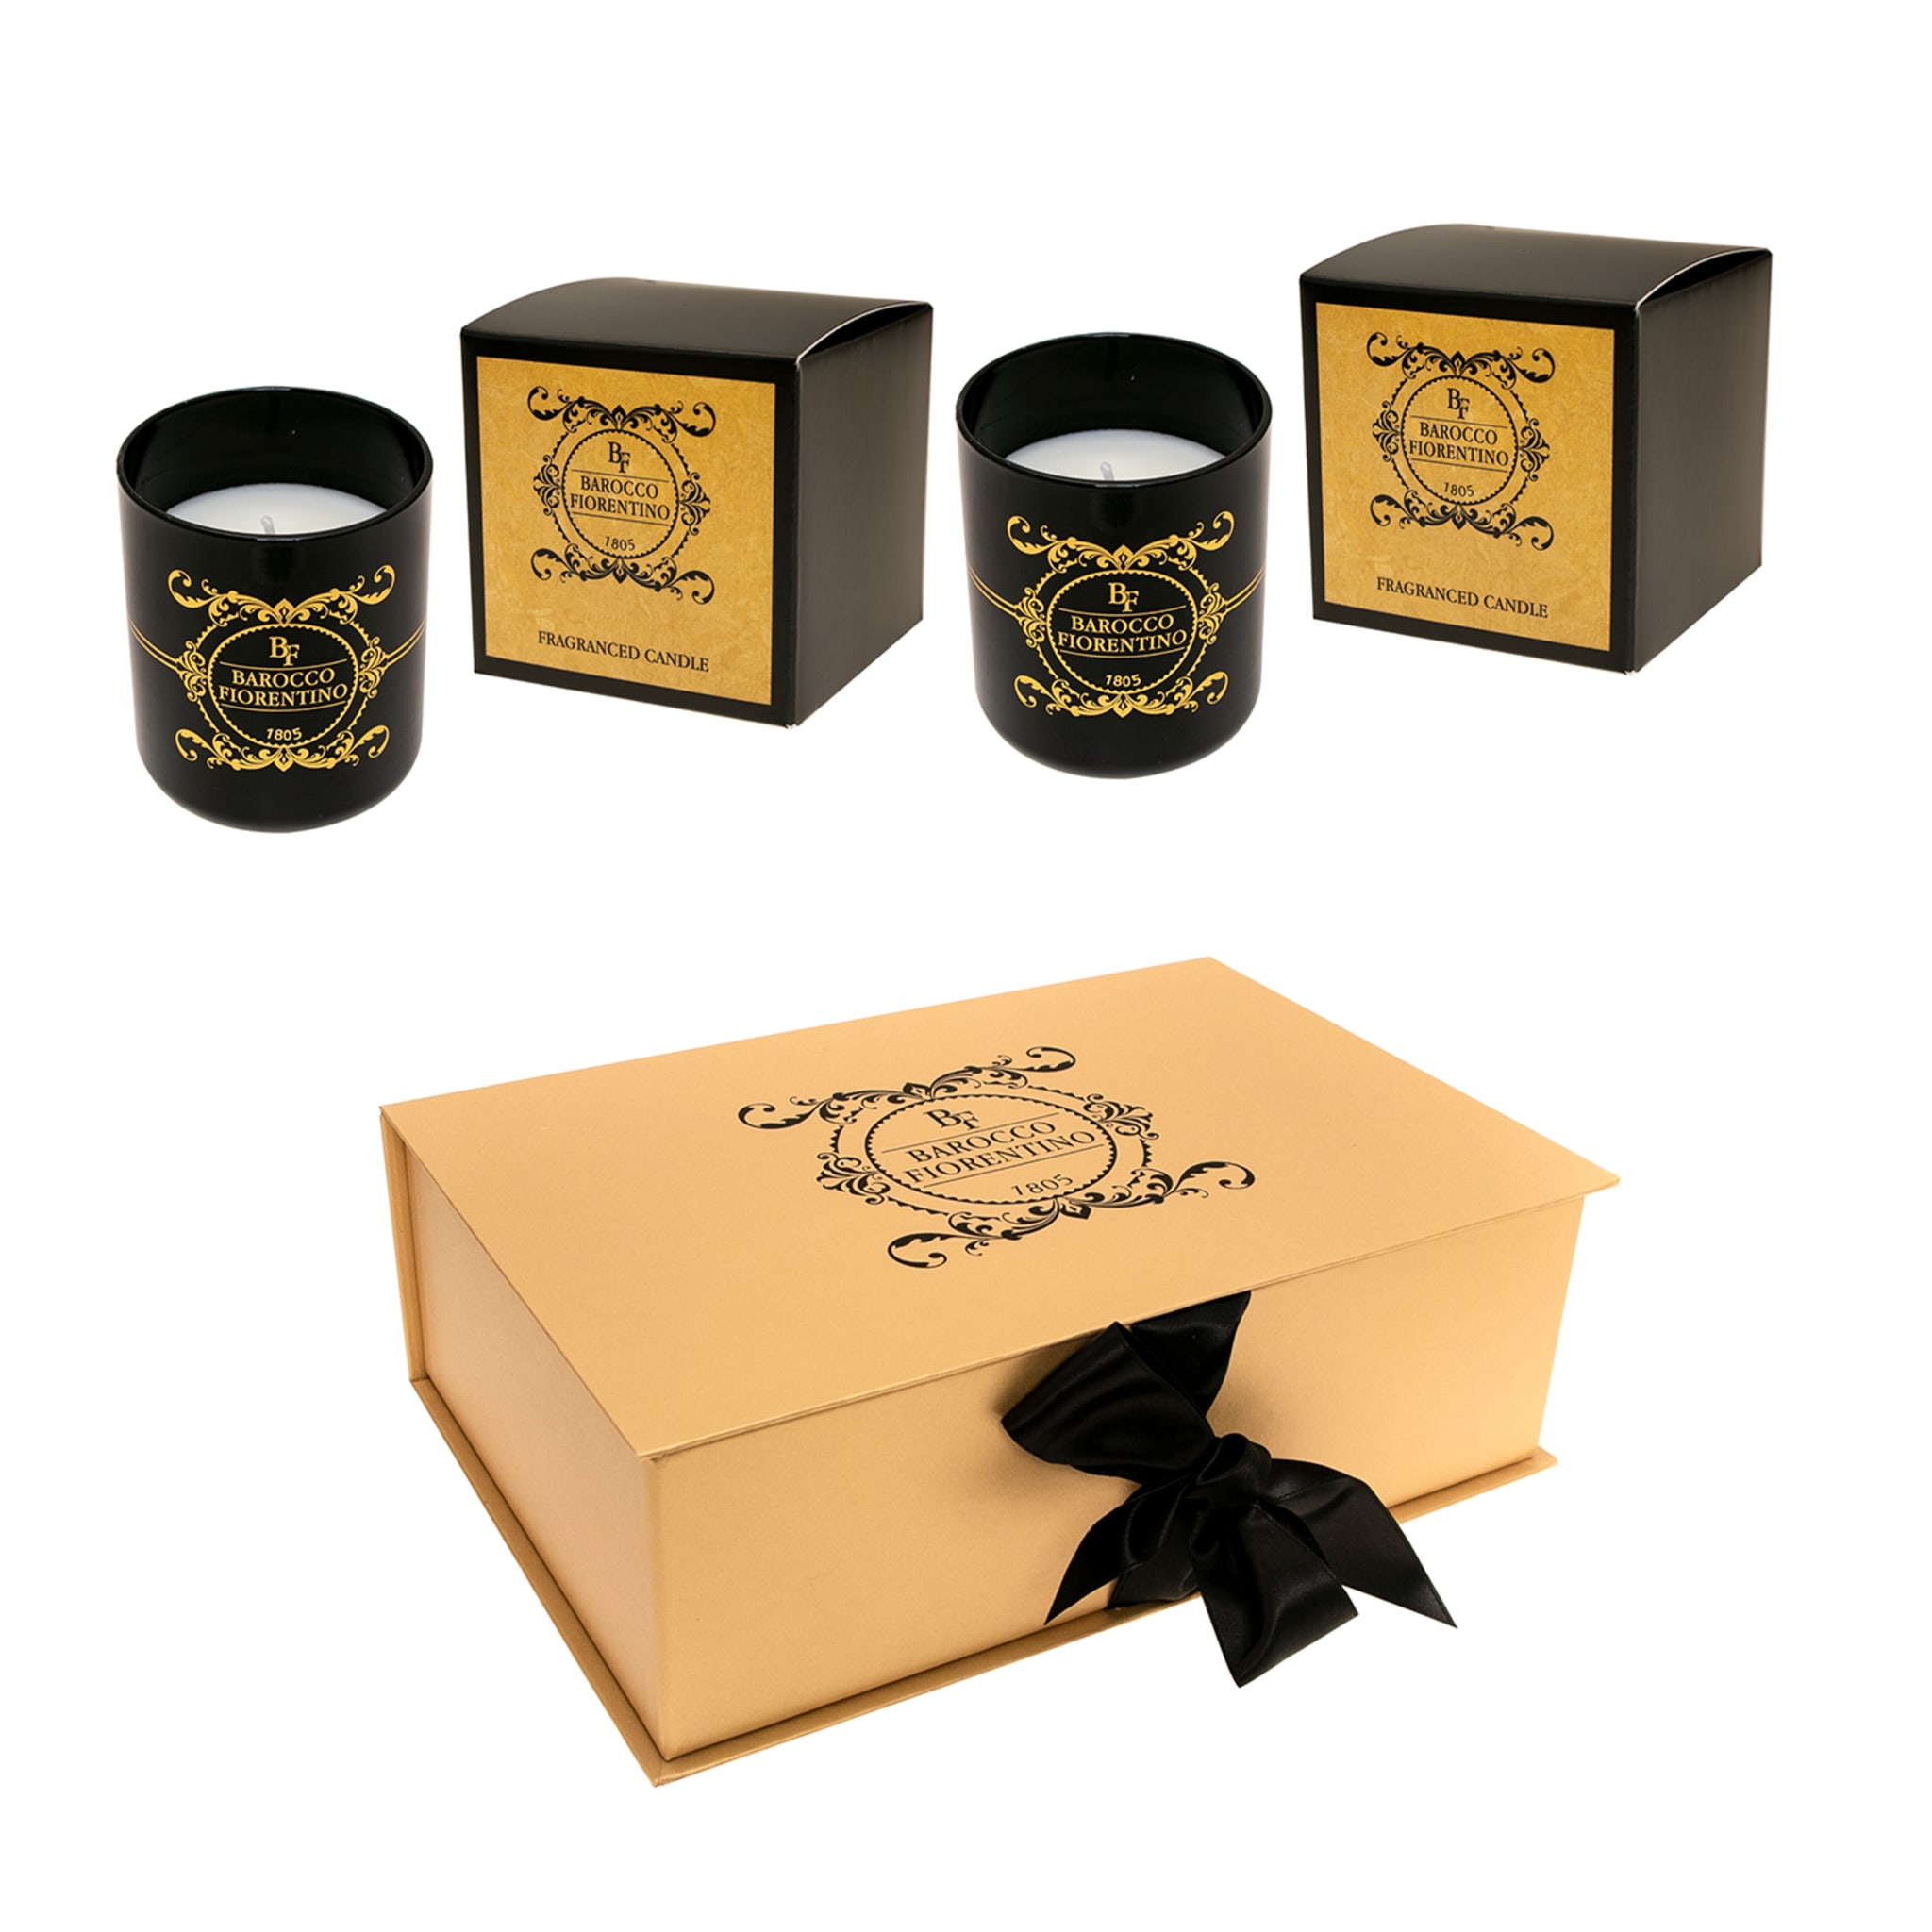 Barocco Fiorentino Set of 2 Scented Candles - Main view